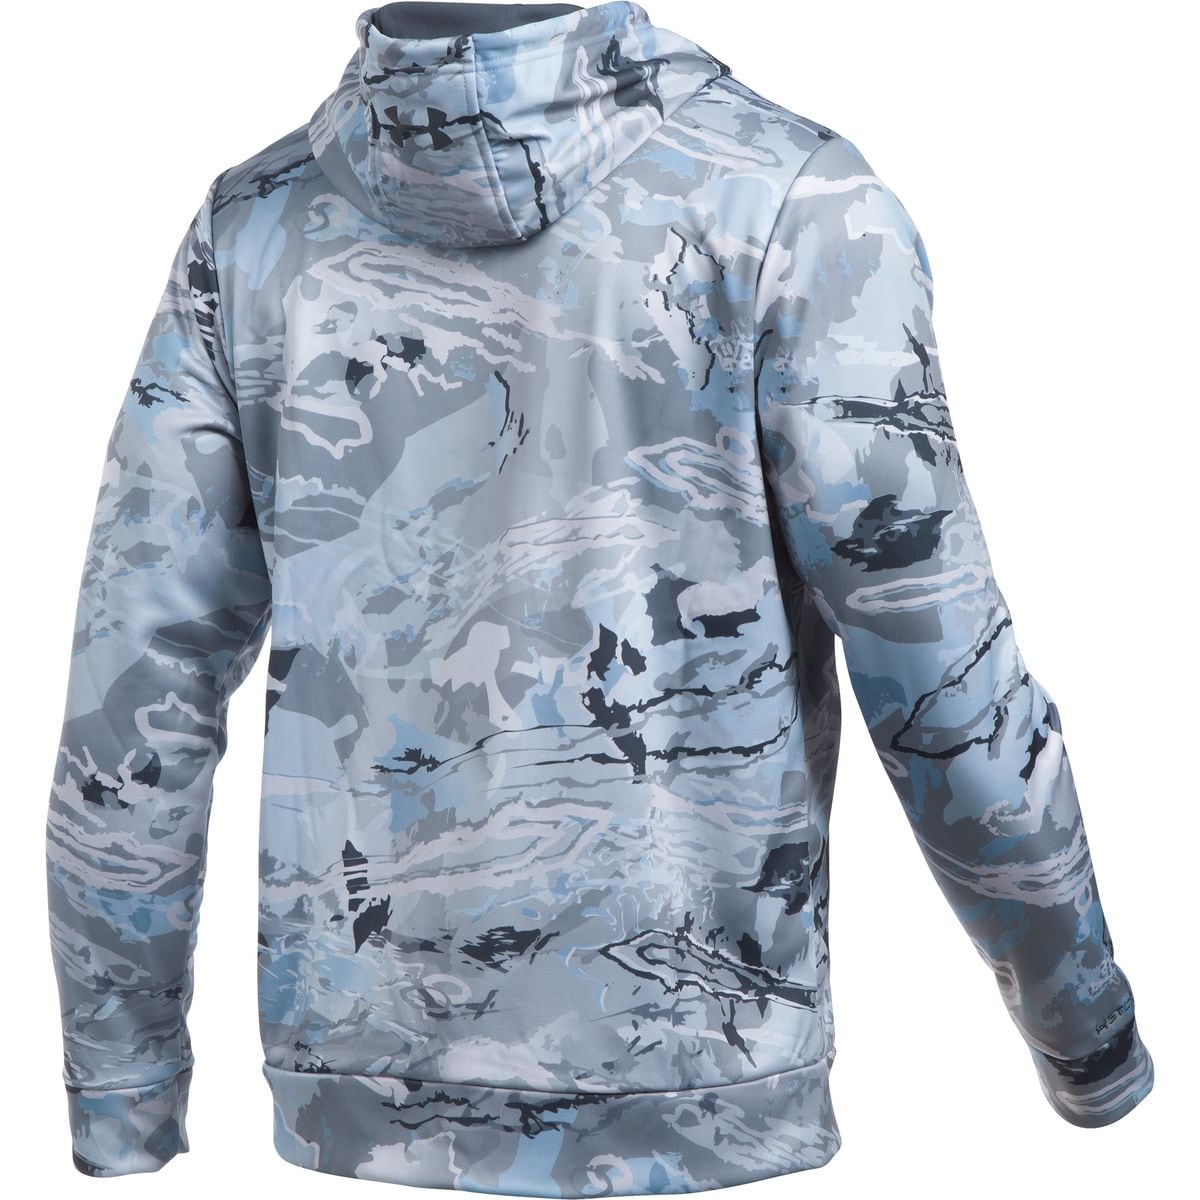 Under Armour Franchise Camo Pullover Hoodie - Men's | eBay